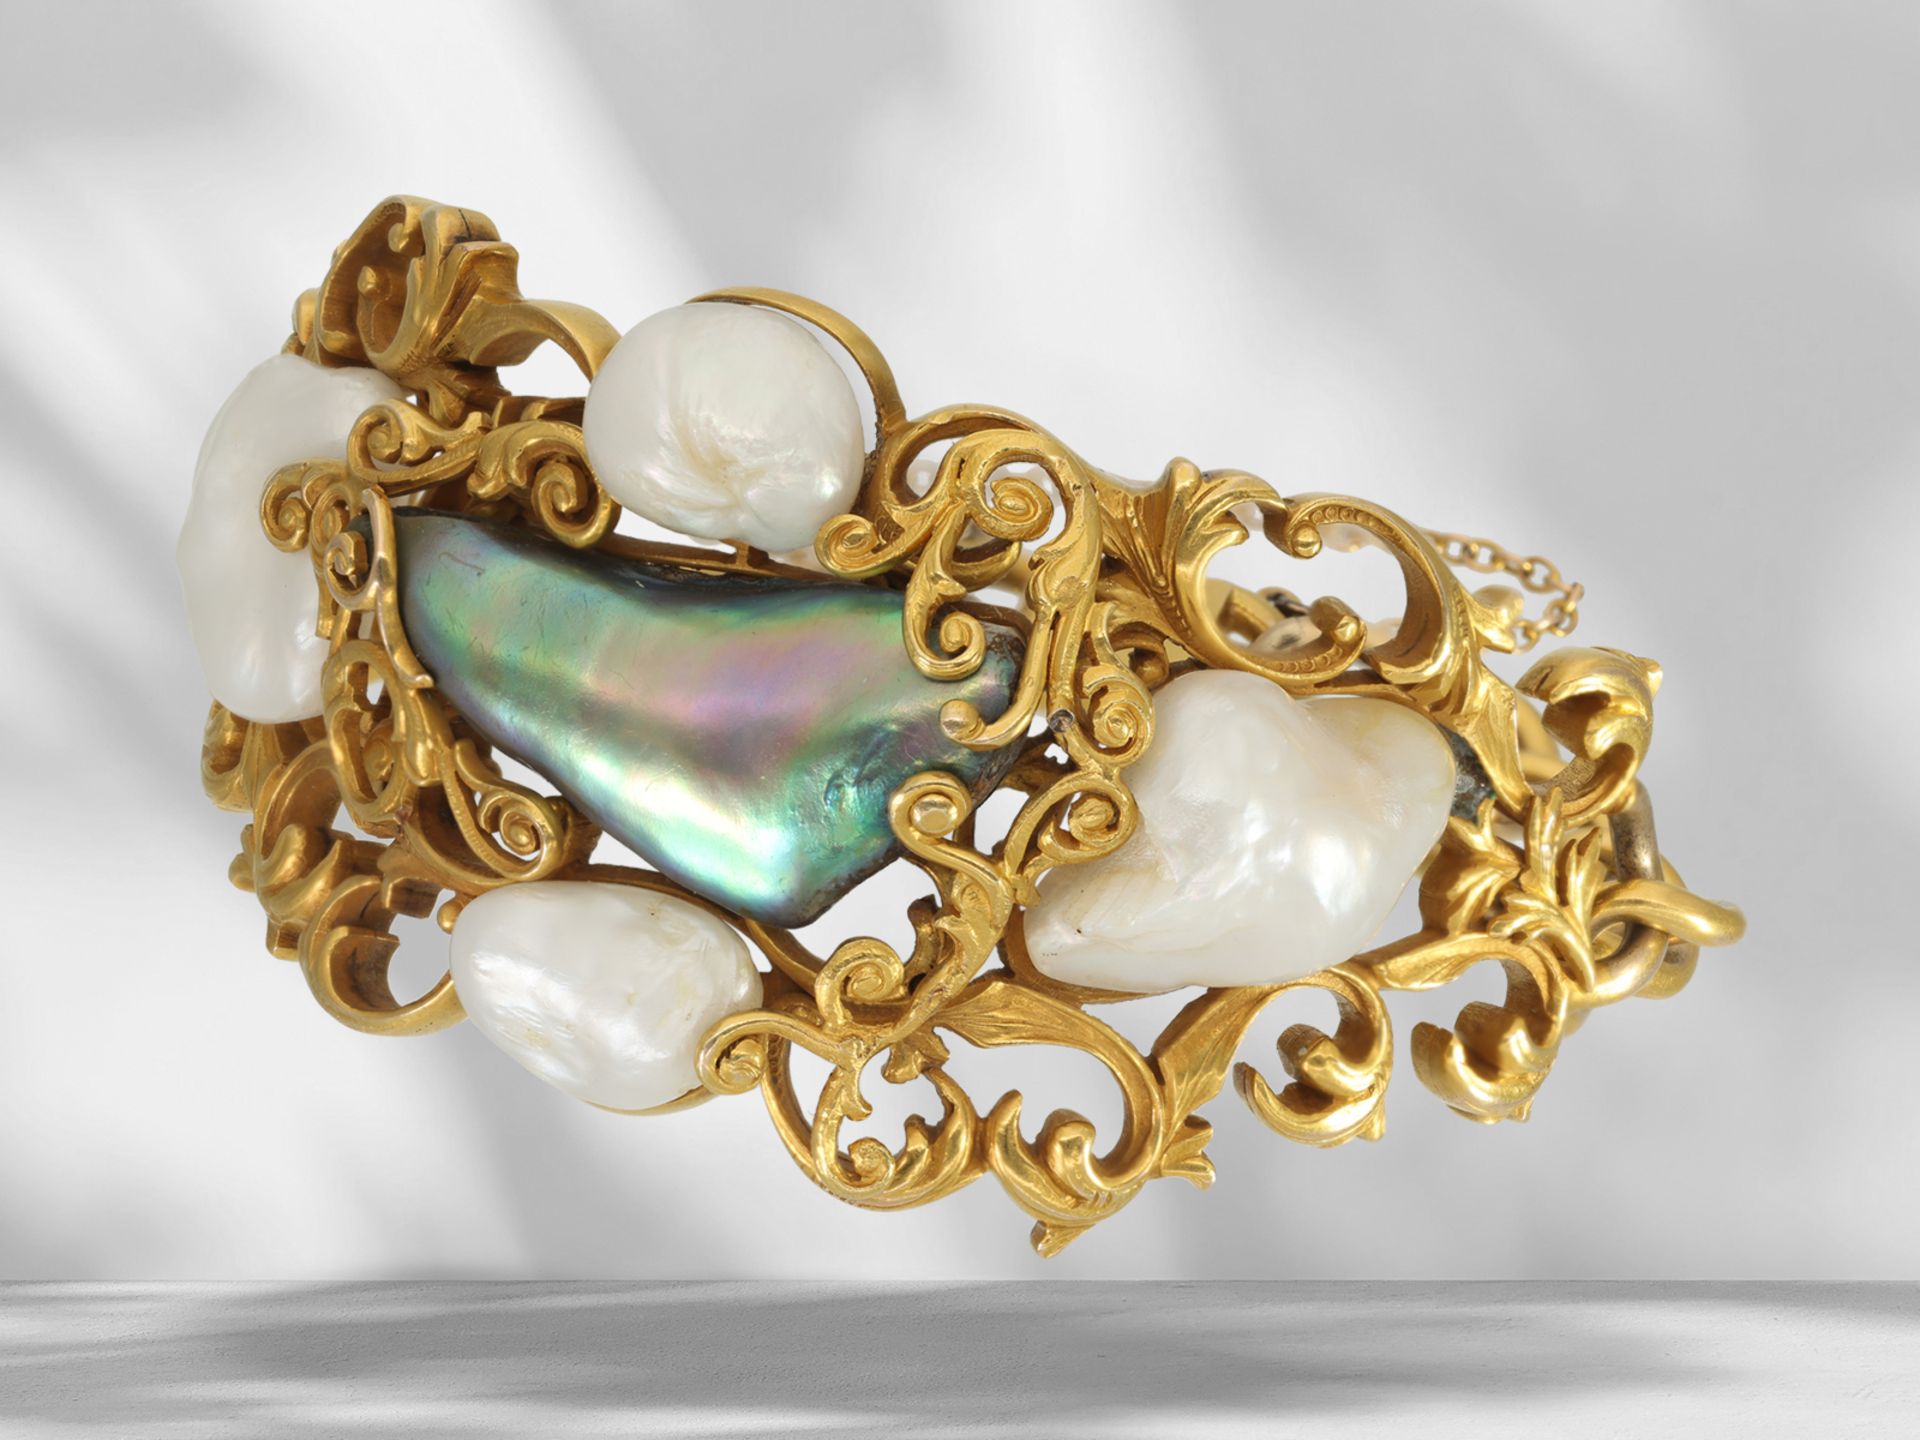 Bracelet: interesting and very unusual antique bracelet/bangle with rare baroque pearls, around 1900 - Image 4 of 7